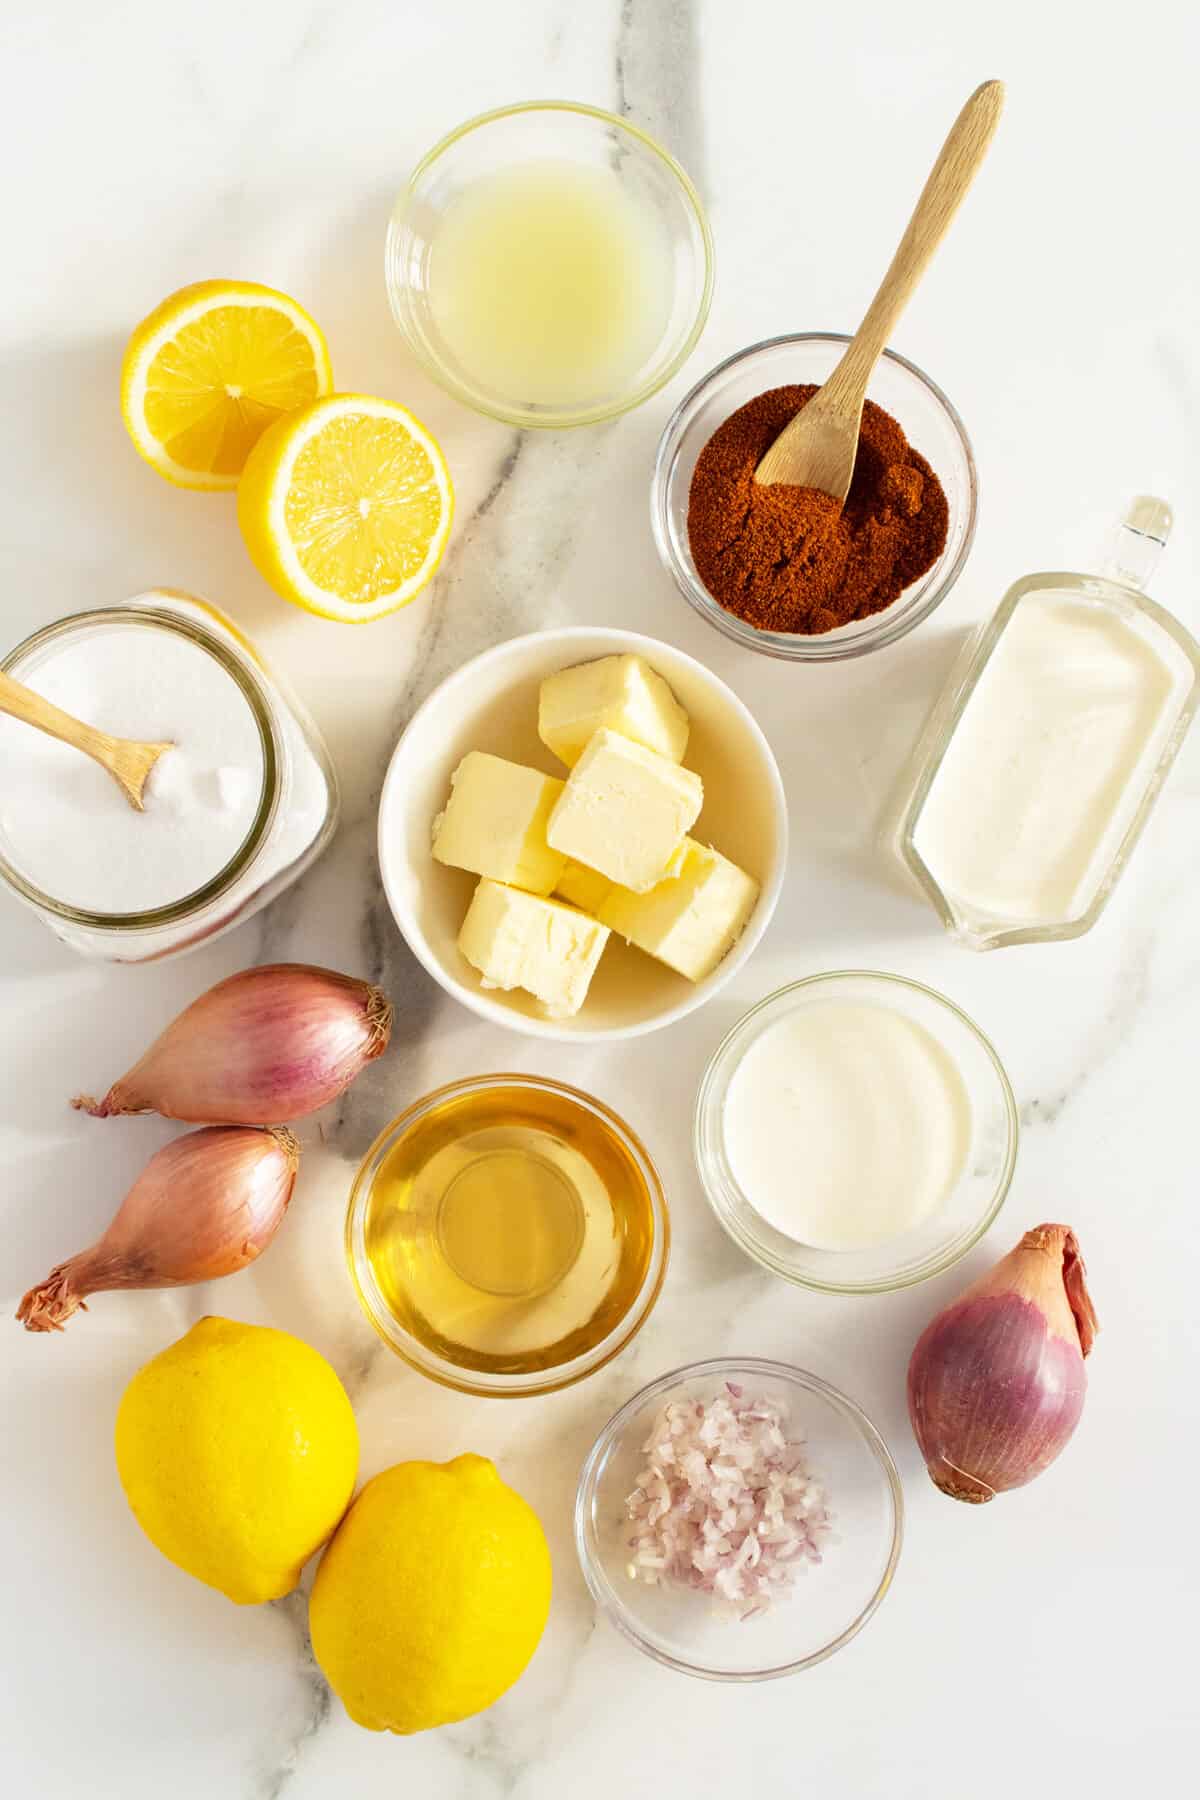 Beurre blanc ingredients in small bowls